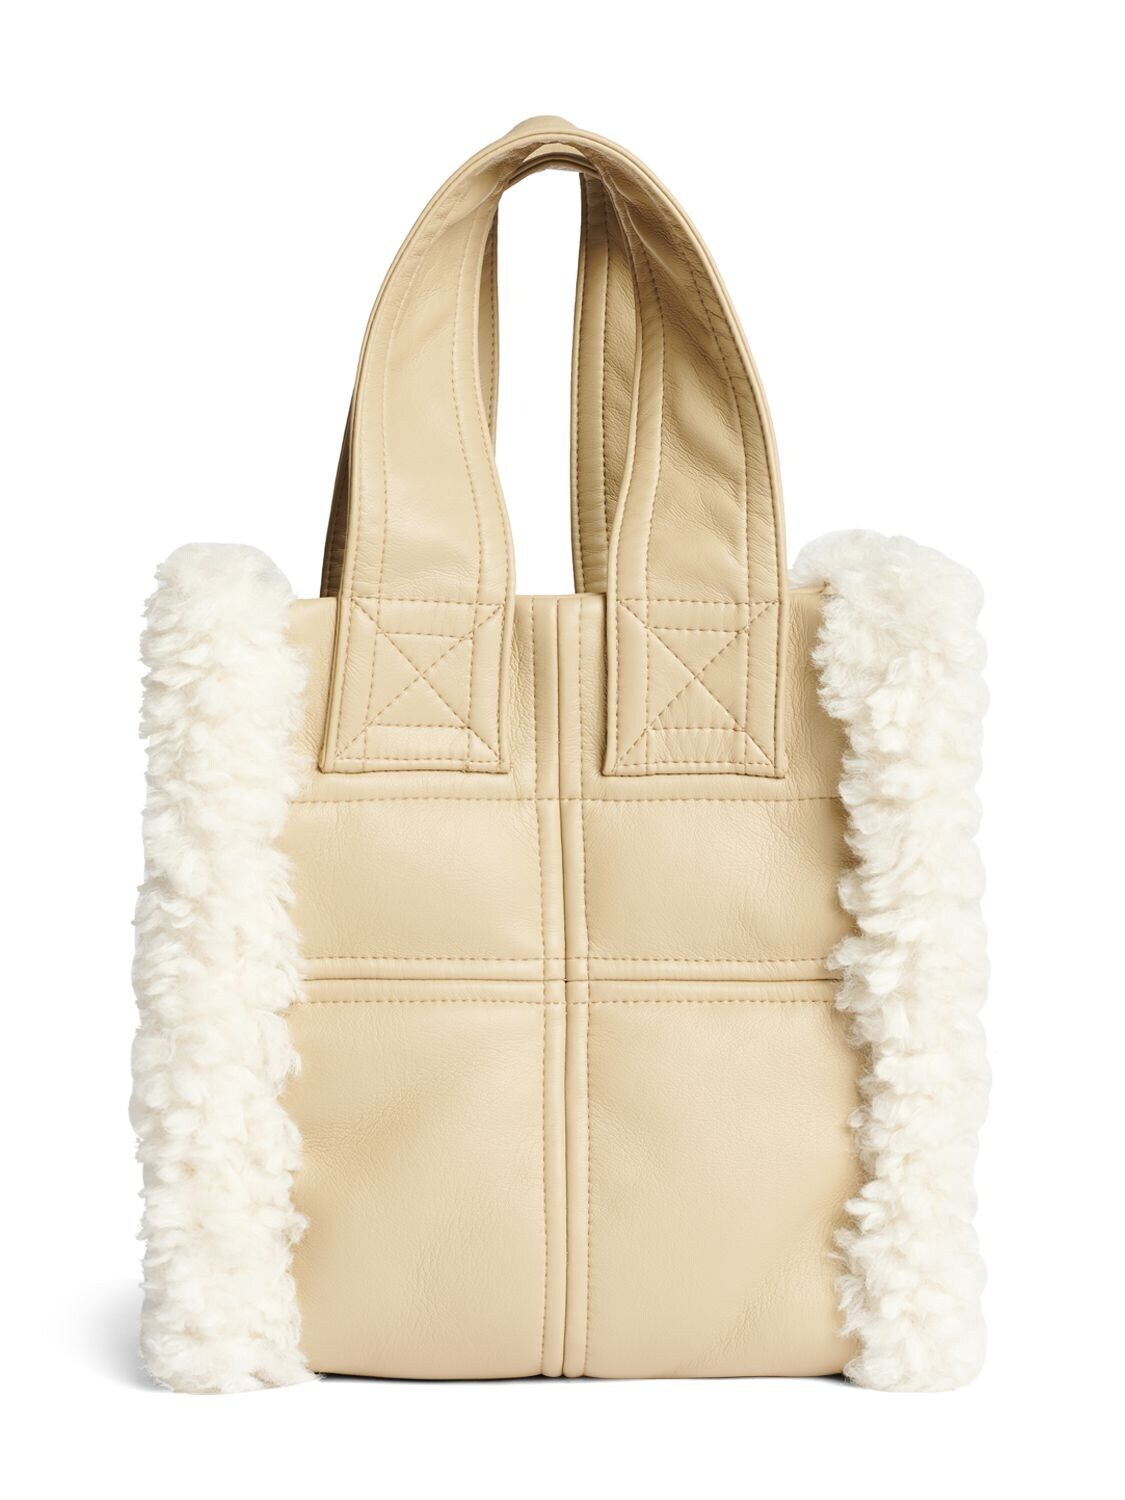 STAND STUDIO Lisetnis Faux Leather & Shearling Bag in sand / white